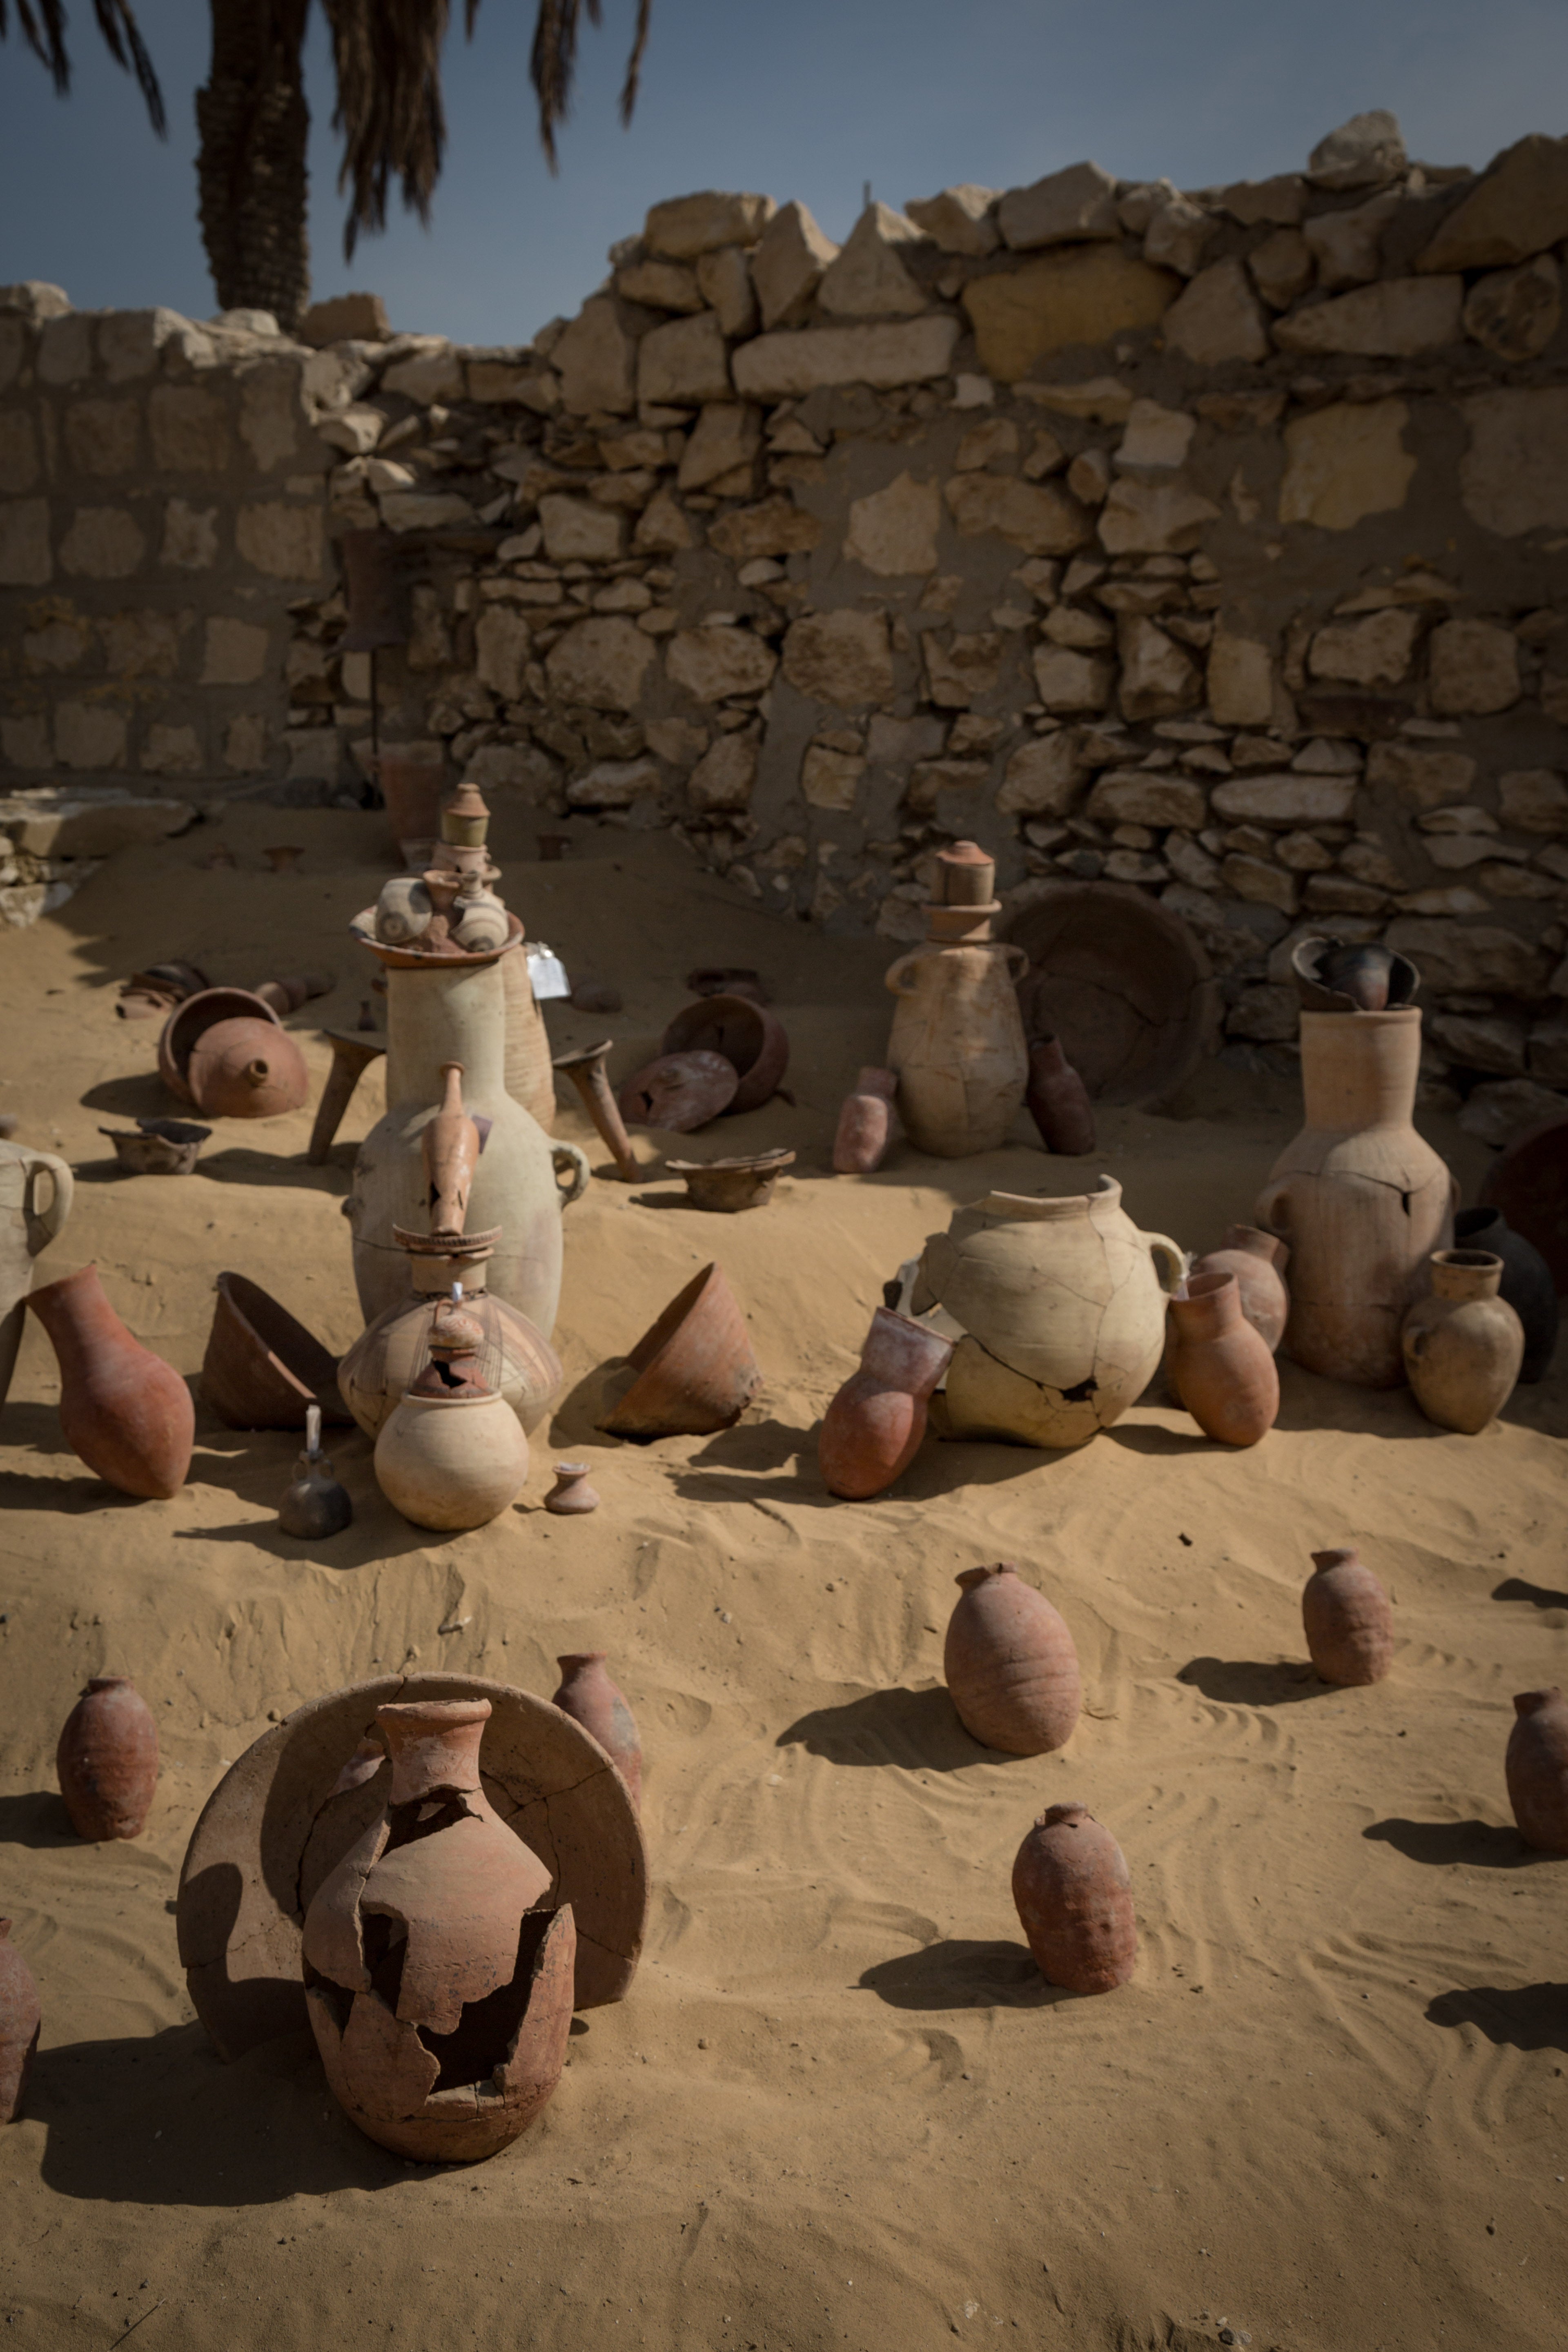 Pottery, some imported, shows the ancient city’s importance as a centre for trade